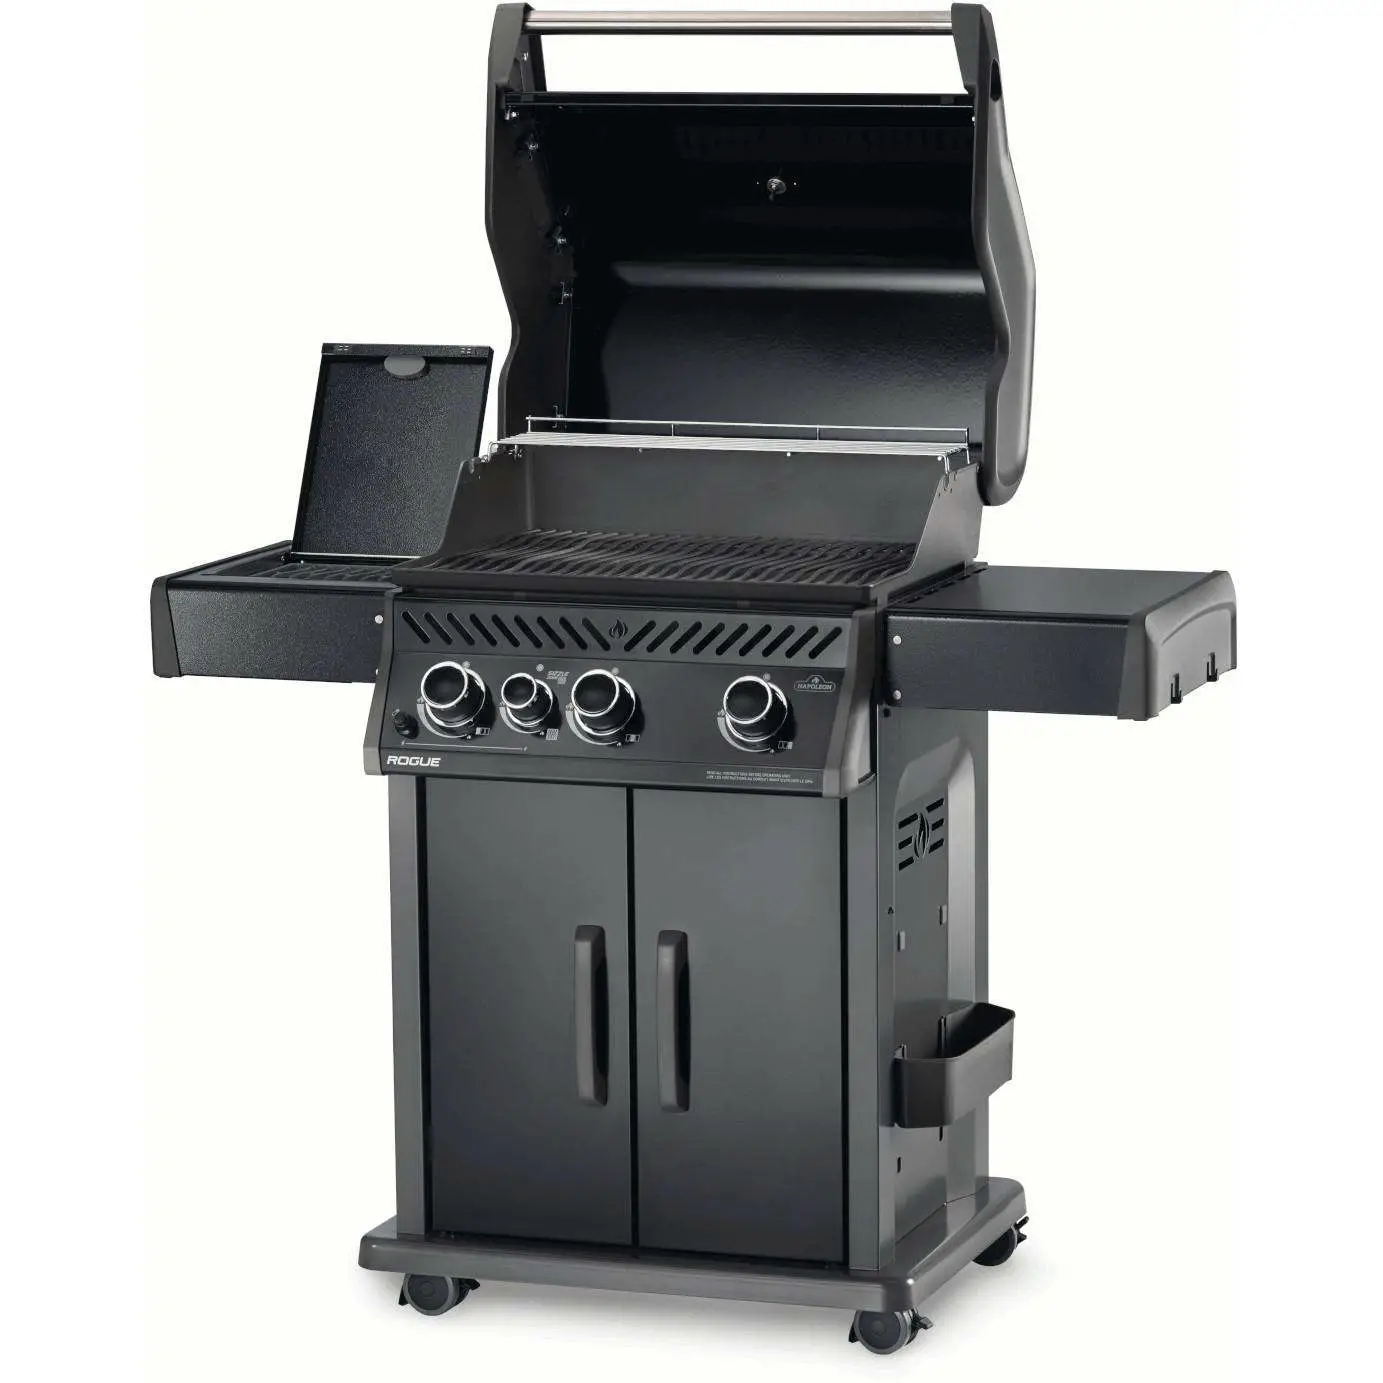 Napoleon Rogue 425 Propane Gas Grill with Infrared Side Burner